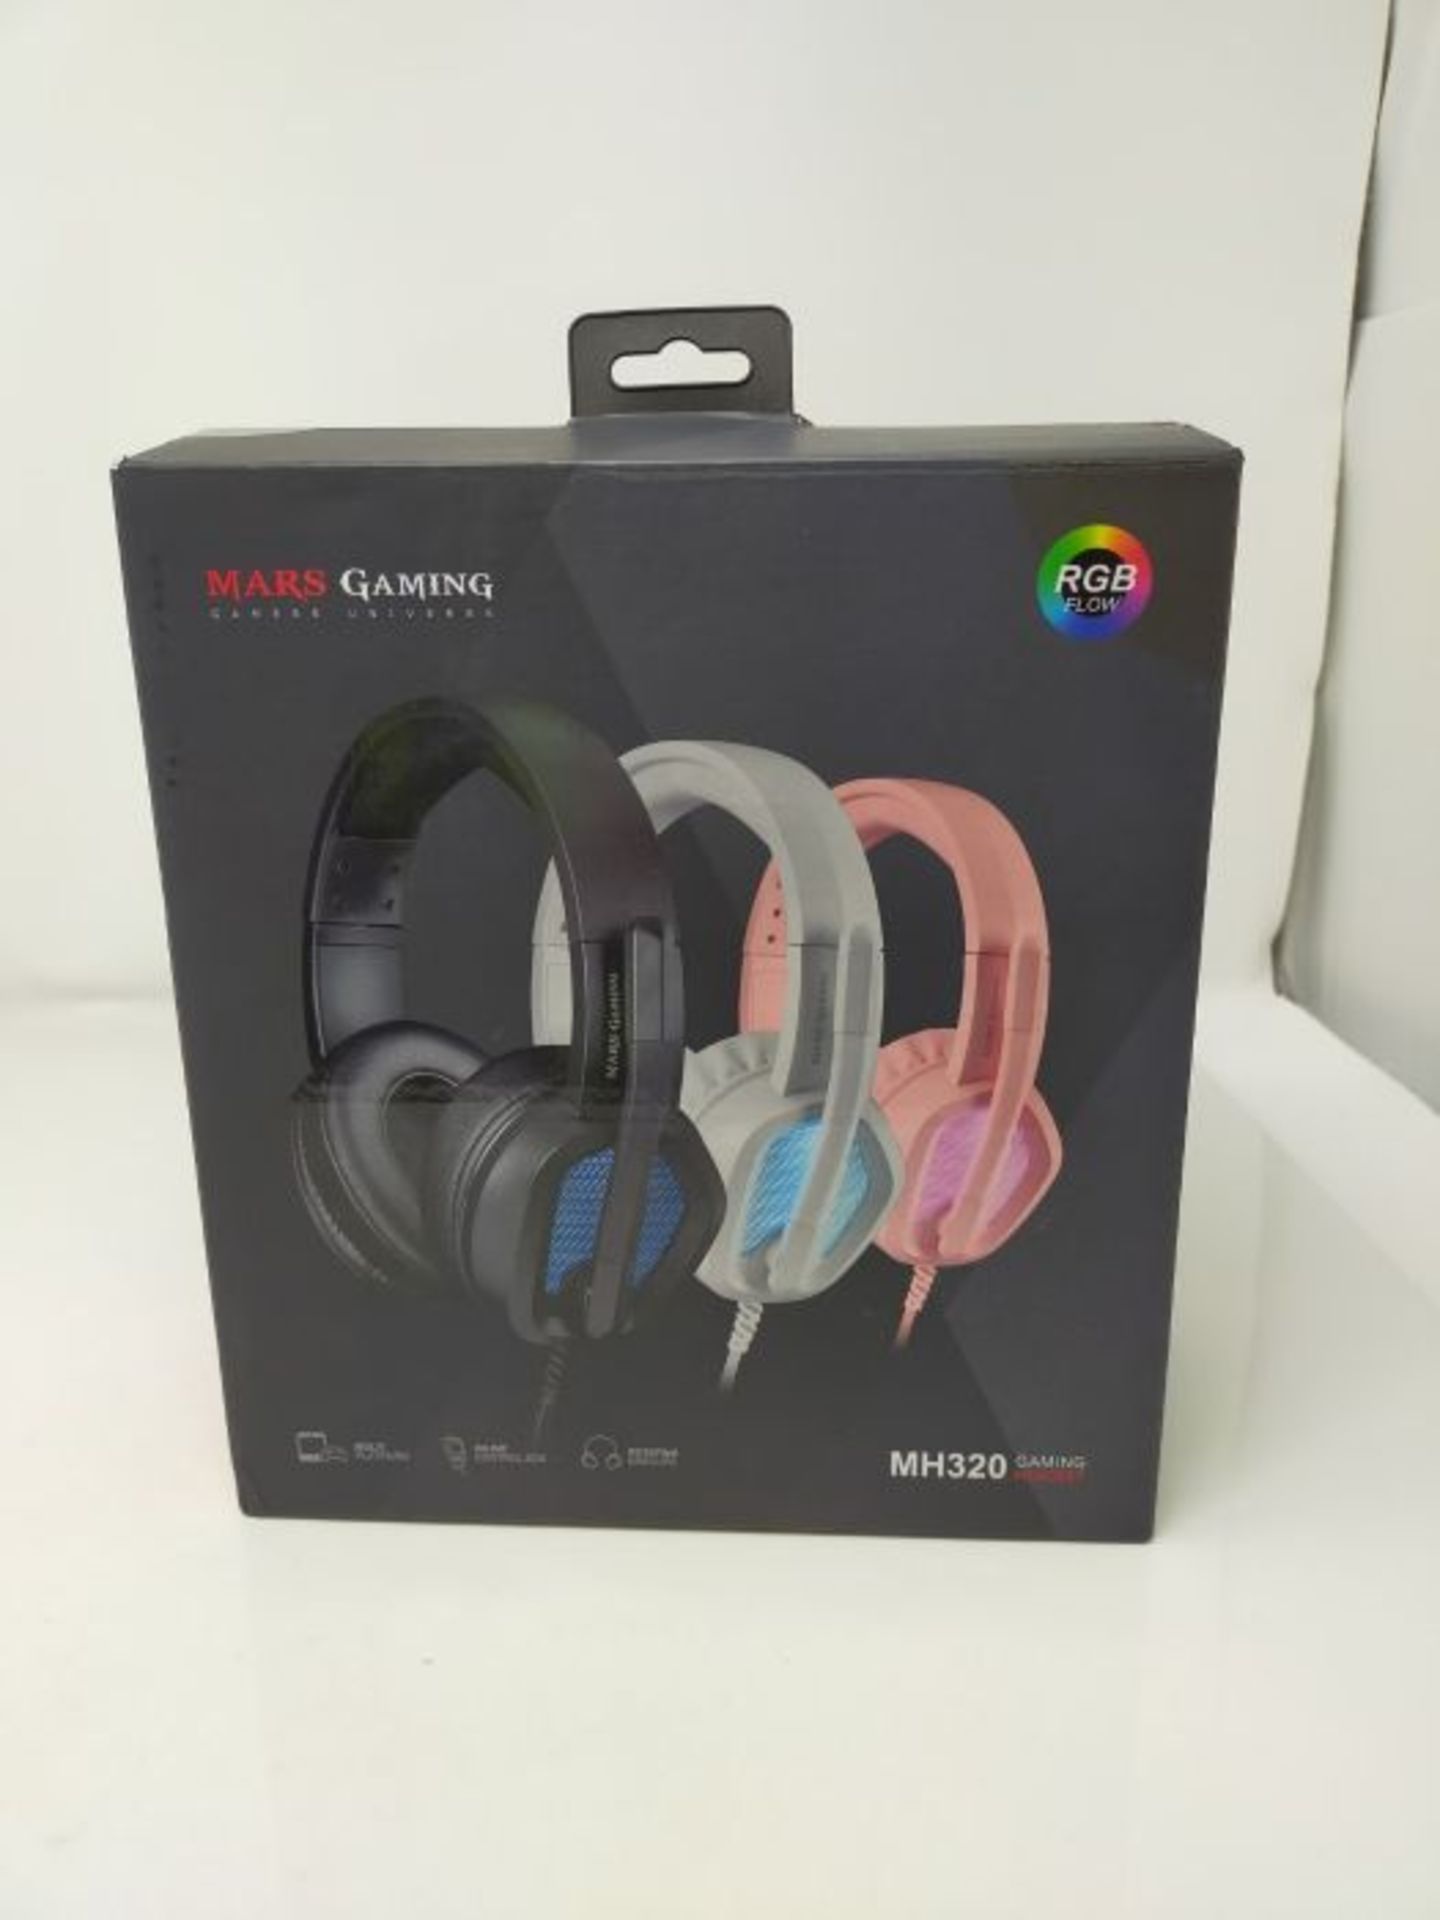 Mars Gaming MH320W White Neodymium RGB Flow Headset, Microphone and Control Box - Image 2 of 3